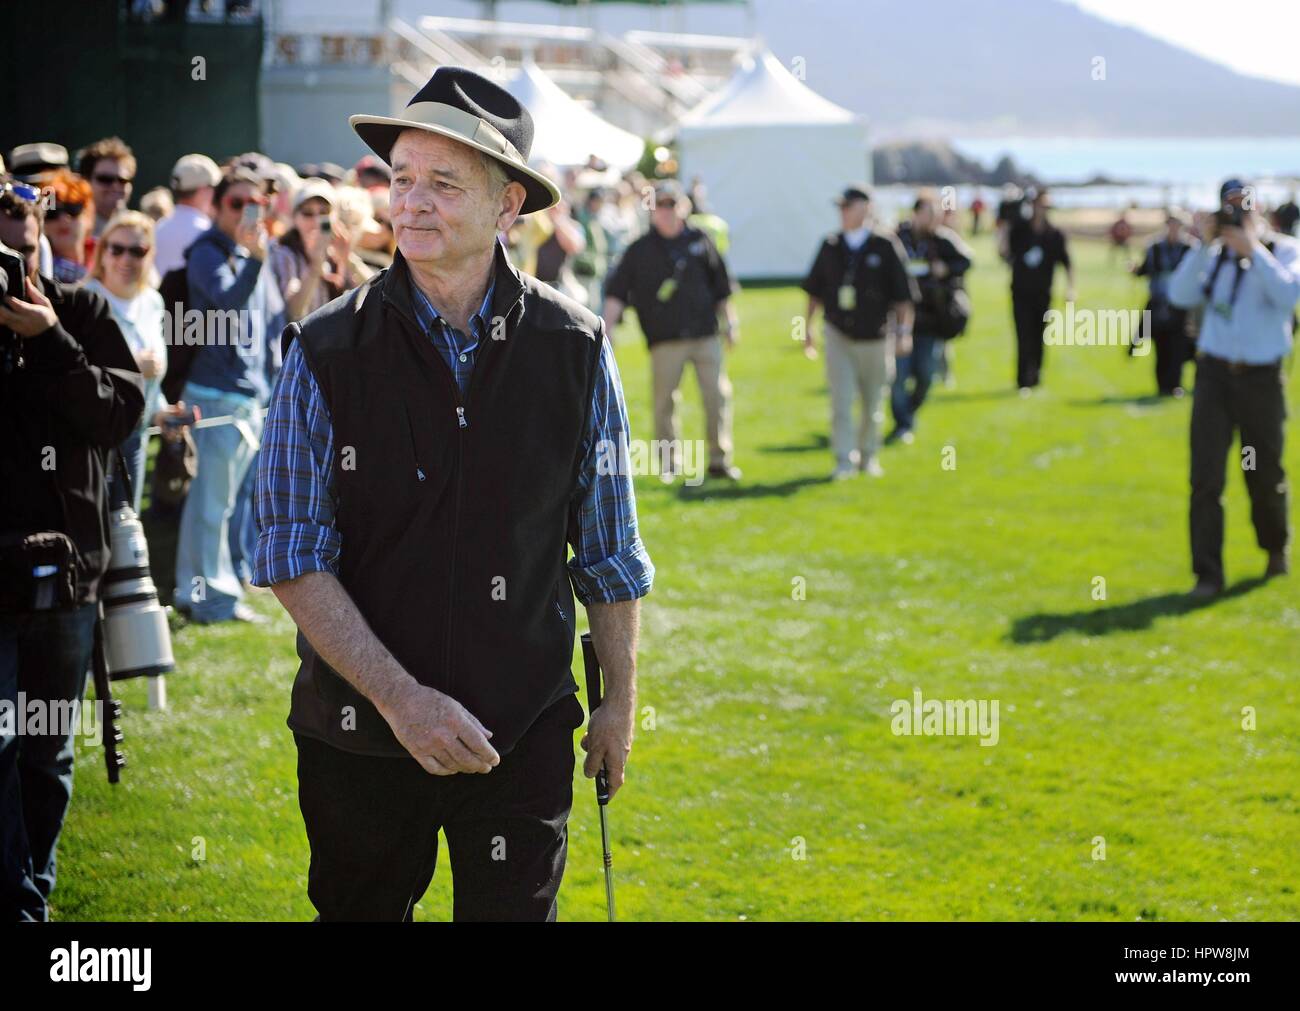 Actor and comedian Bill Murray wearing a matching black hat and sweater vest in action during the AT&T Pebble Beach National Pro-Am golf tournament February 9, 2011 in Monterey, California. Stock Photo